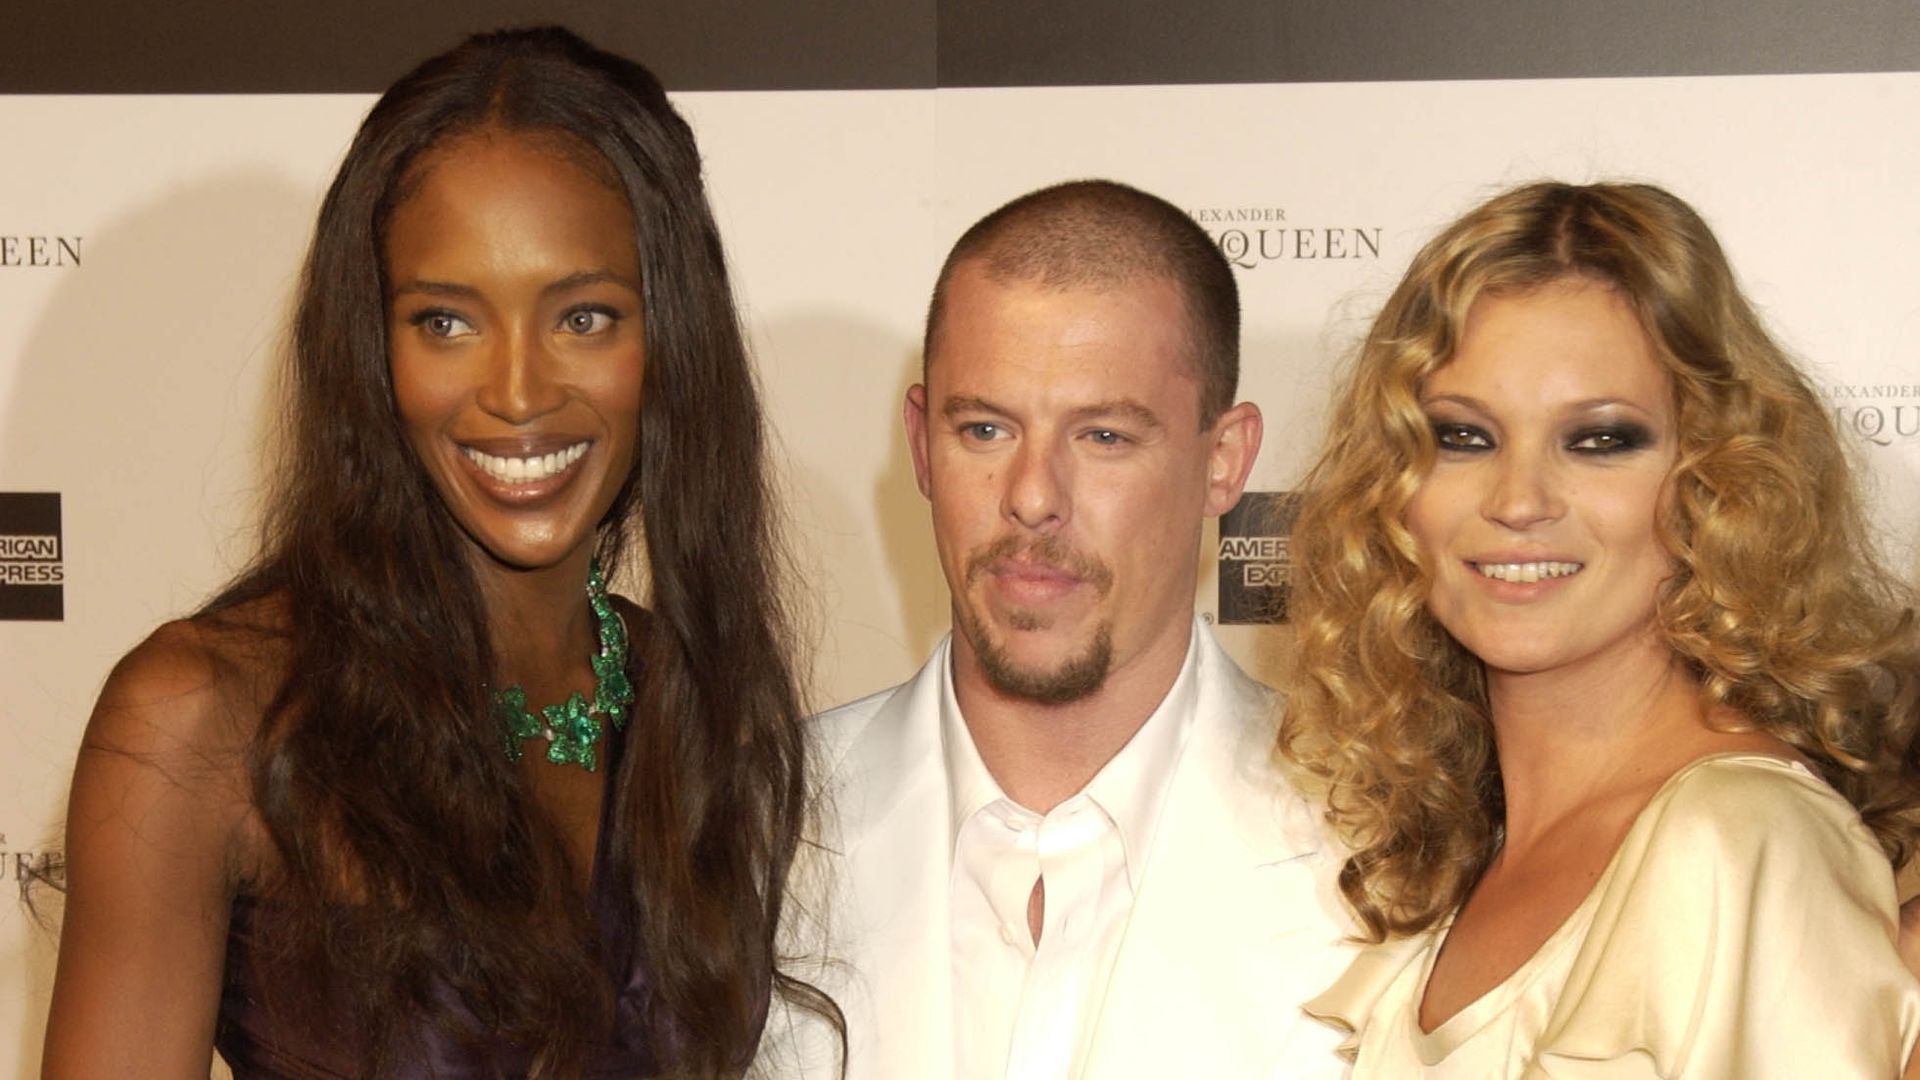 Alexander McQueen: The life and legacy of the fashion designer revealed in ten pictures